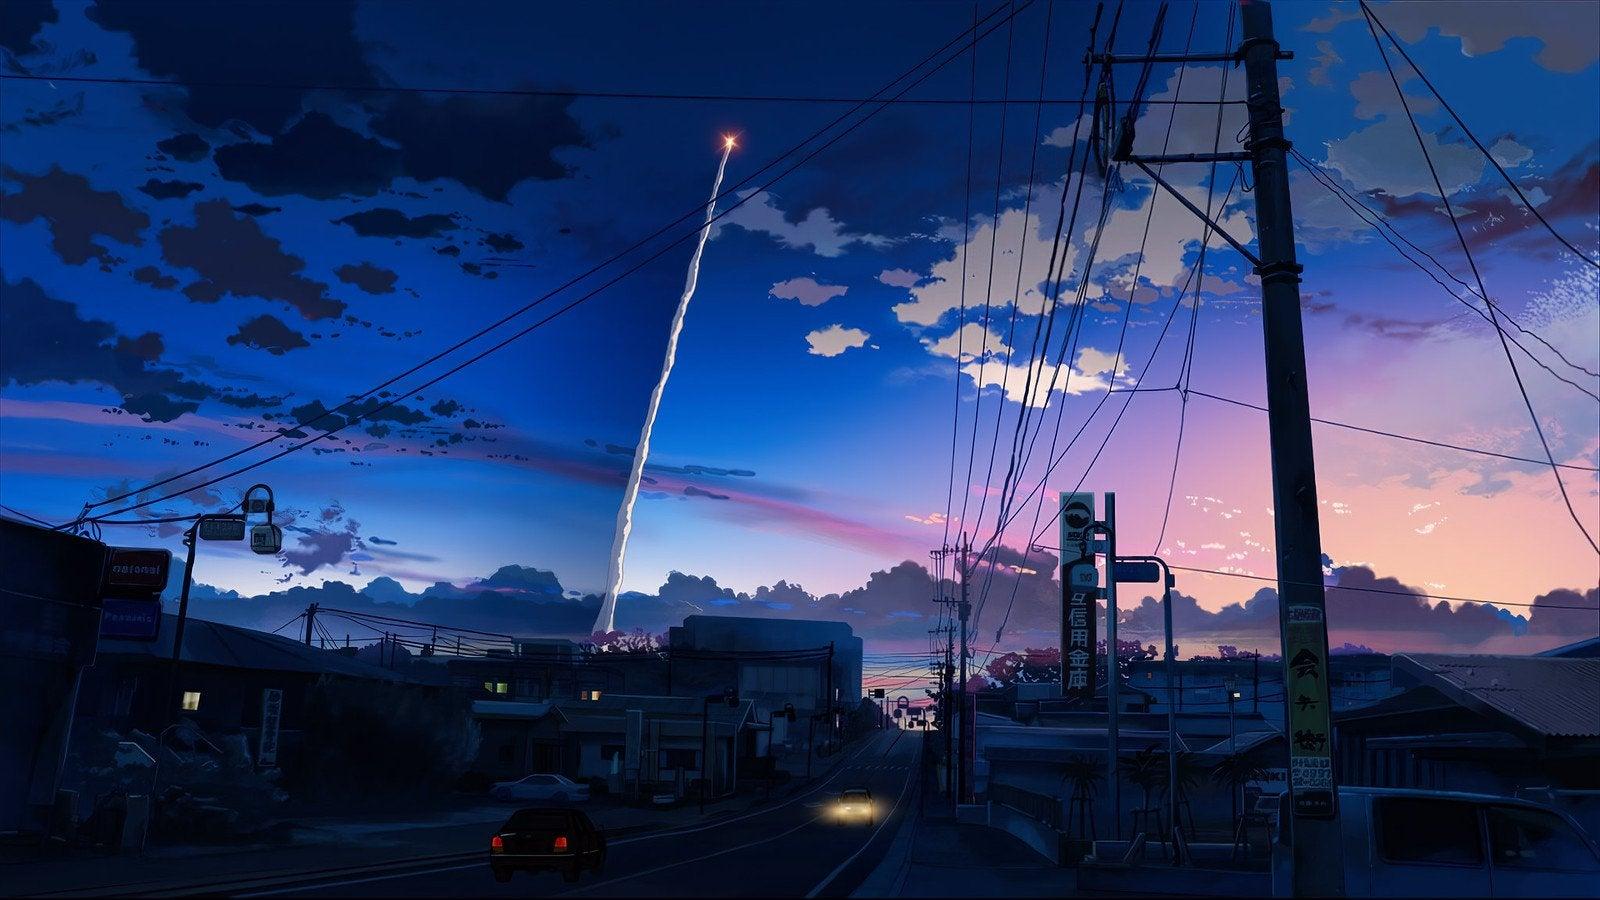 You guys asked for wallpaper from 5 Centimeters Per Second